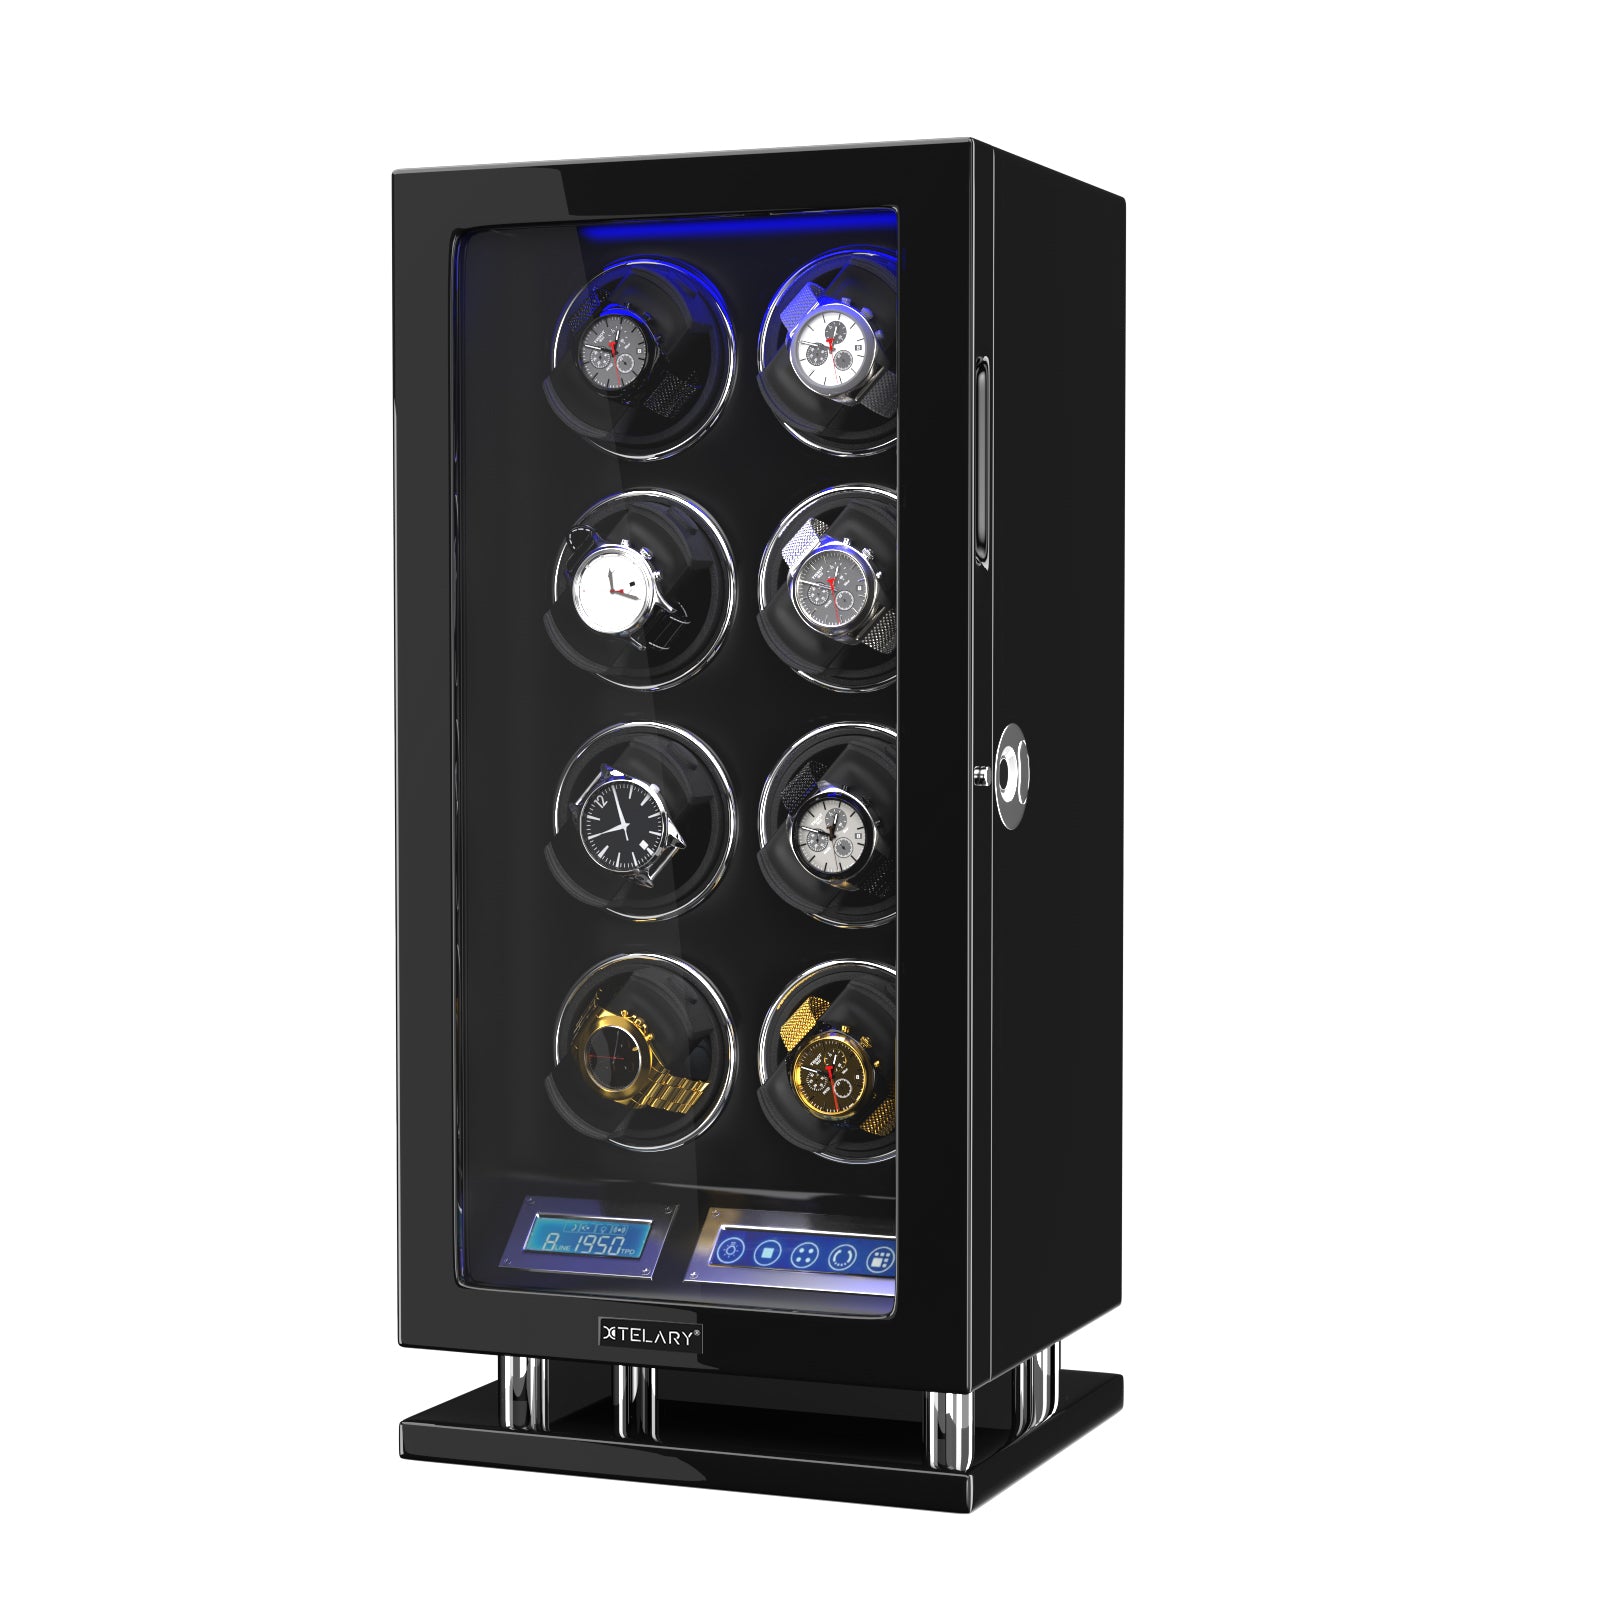 Watch Winder for 8 Automatic Watches with Fingerprint Unlock Ultra-Quiet Motors